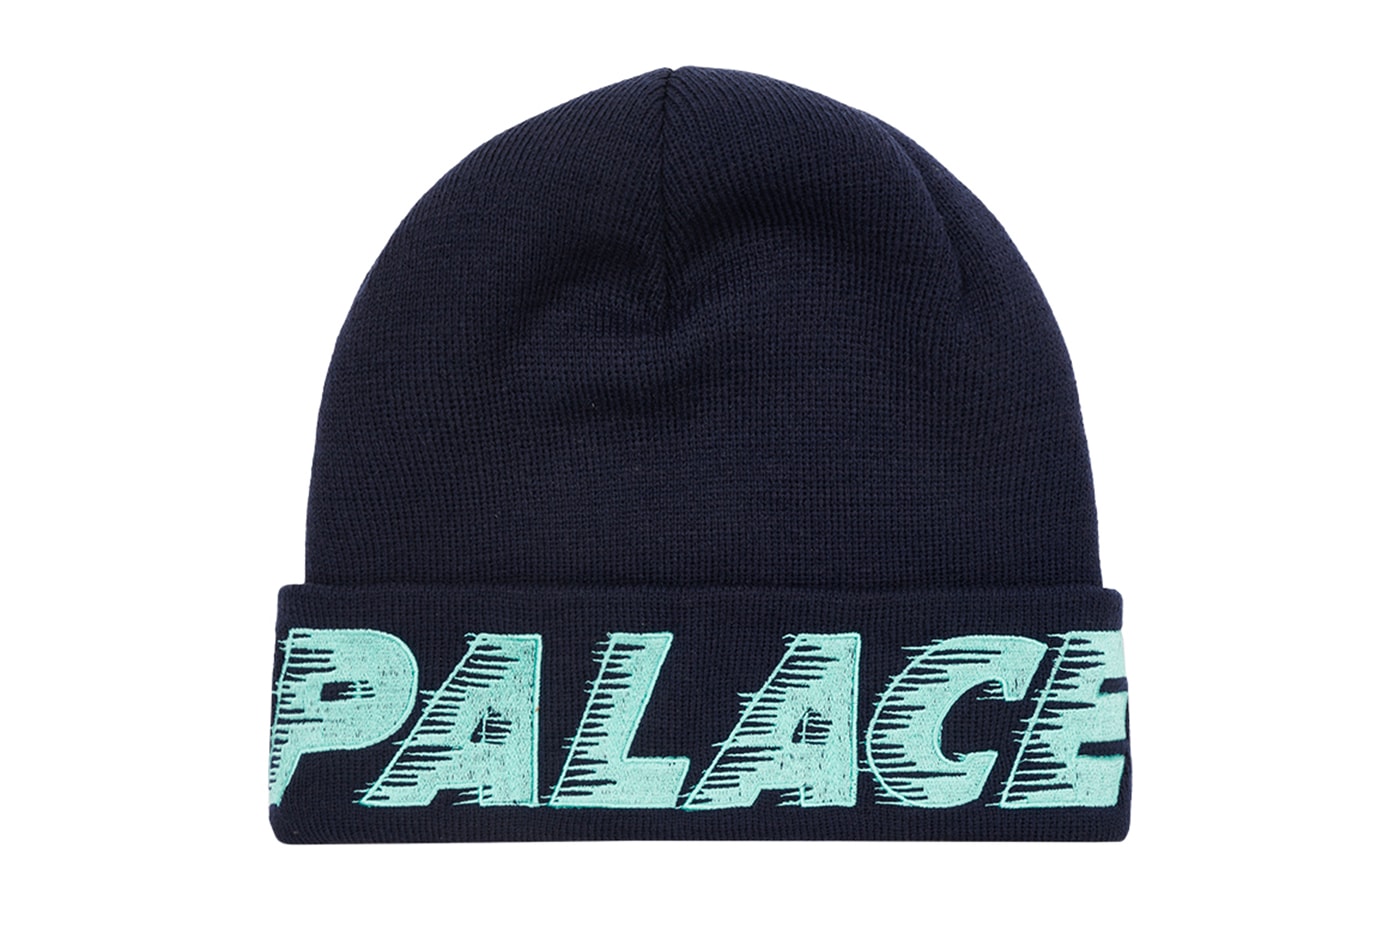 Palace Winter 2022 Collection Week 2 Drop List Release Info Date Buy Price Phaidon Palace Product Descriptions: The Selected Archive Lev Tanju